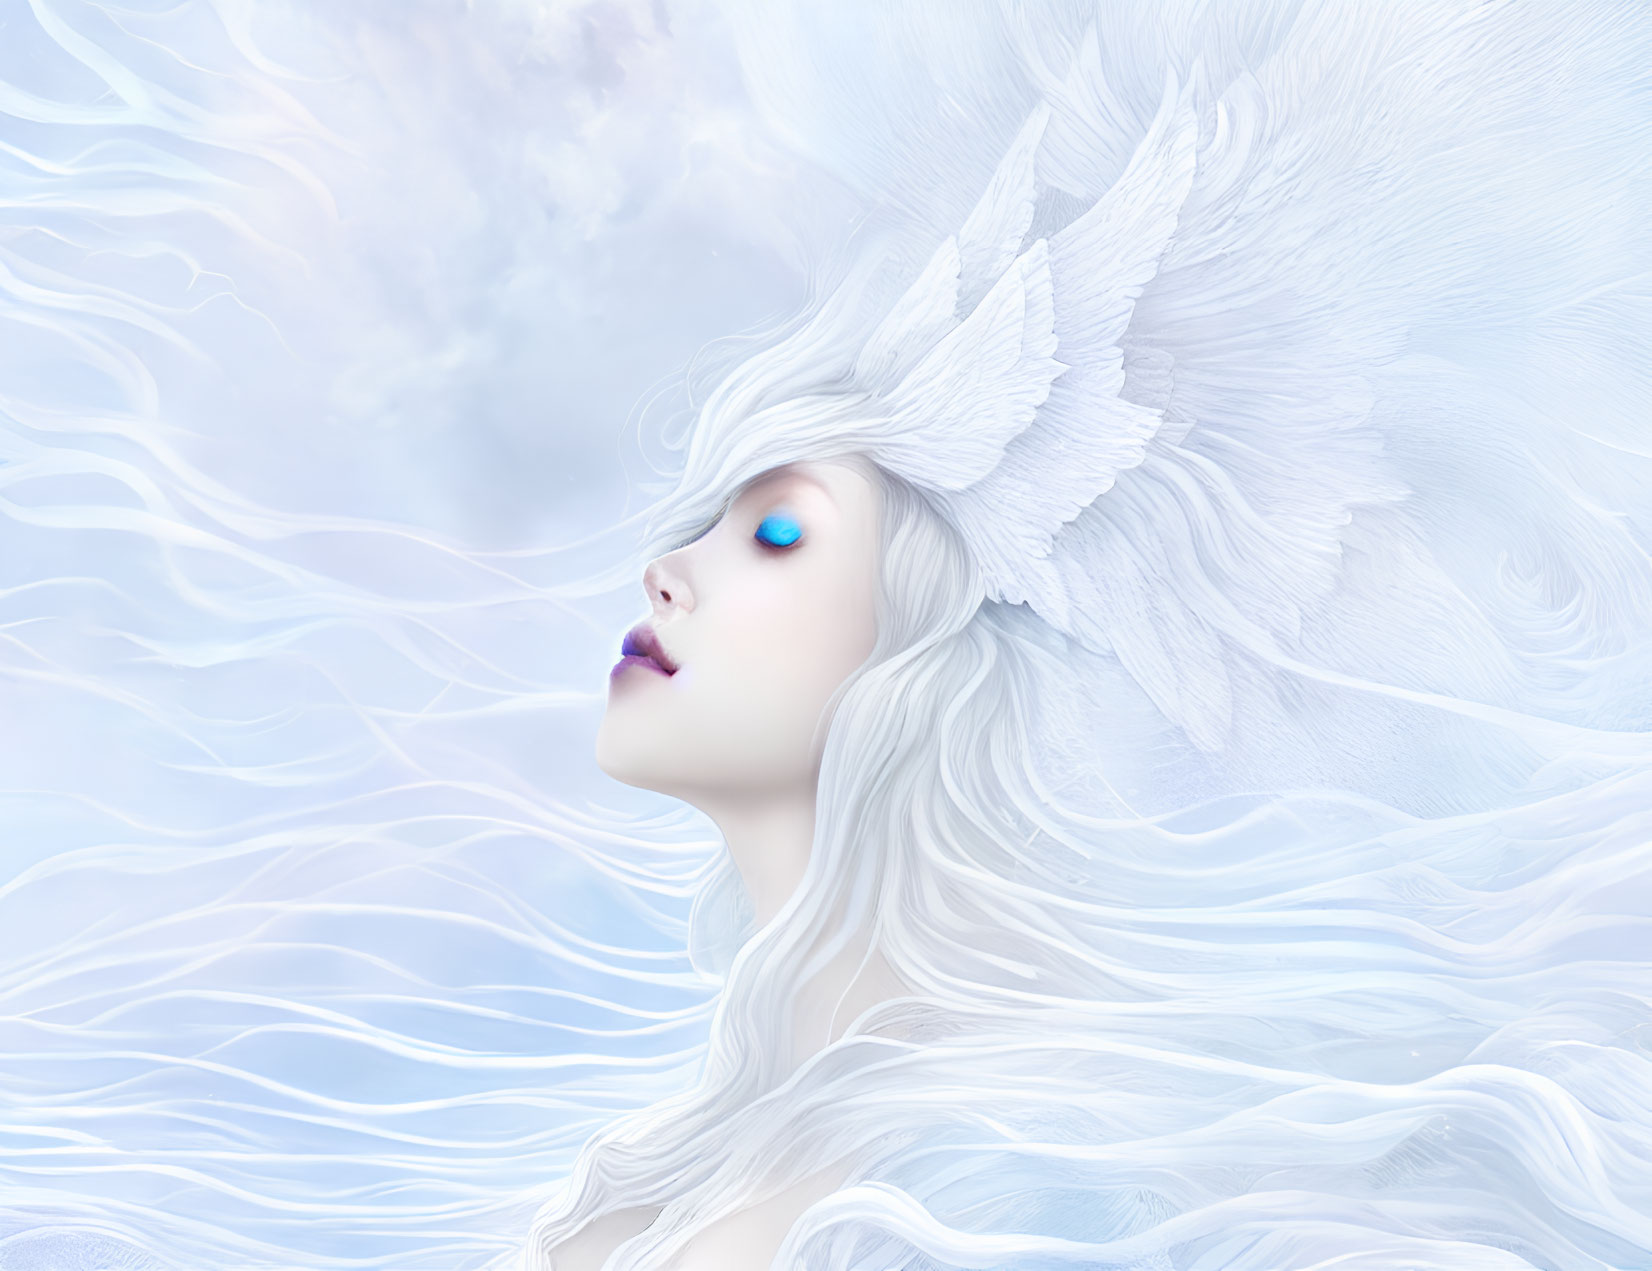 Fantasy illustration of woman with white hair and winged headdress in blue and white backdrop